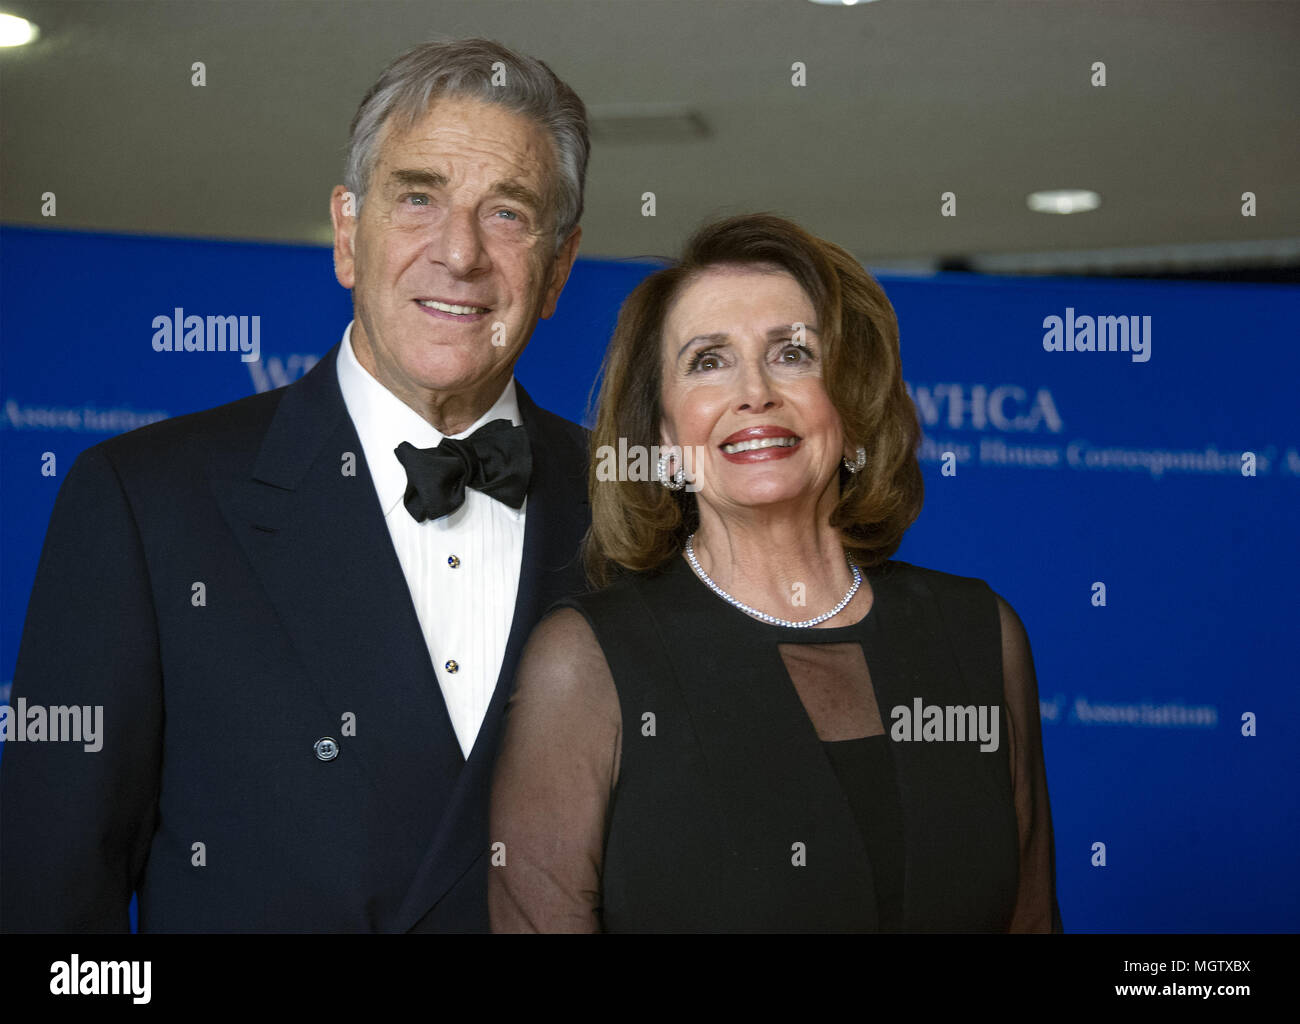 Washington, District of Columbia, USA. 28th Apr, 2018. United States House Minority Leader Nancy Pelosi (Democrat of California), right, and her husband, Paul, left, arrive for the 2018 White House Correspondents Association Annual Dinner at the Washington Hilton Hotel on Saturday, April 28, 2018.Credit: Ron Sachs/CNP. Credit: Ron Sachs/CNP/ZUMA Wire/Alamy Live News Stock Photo